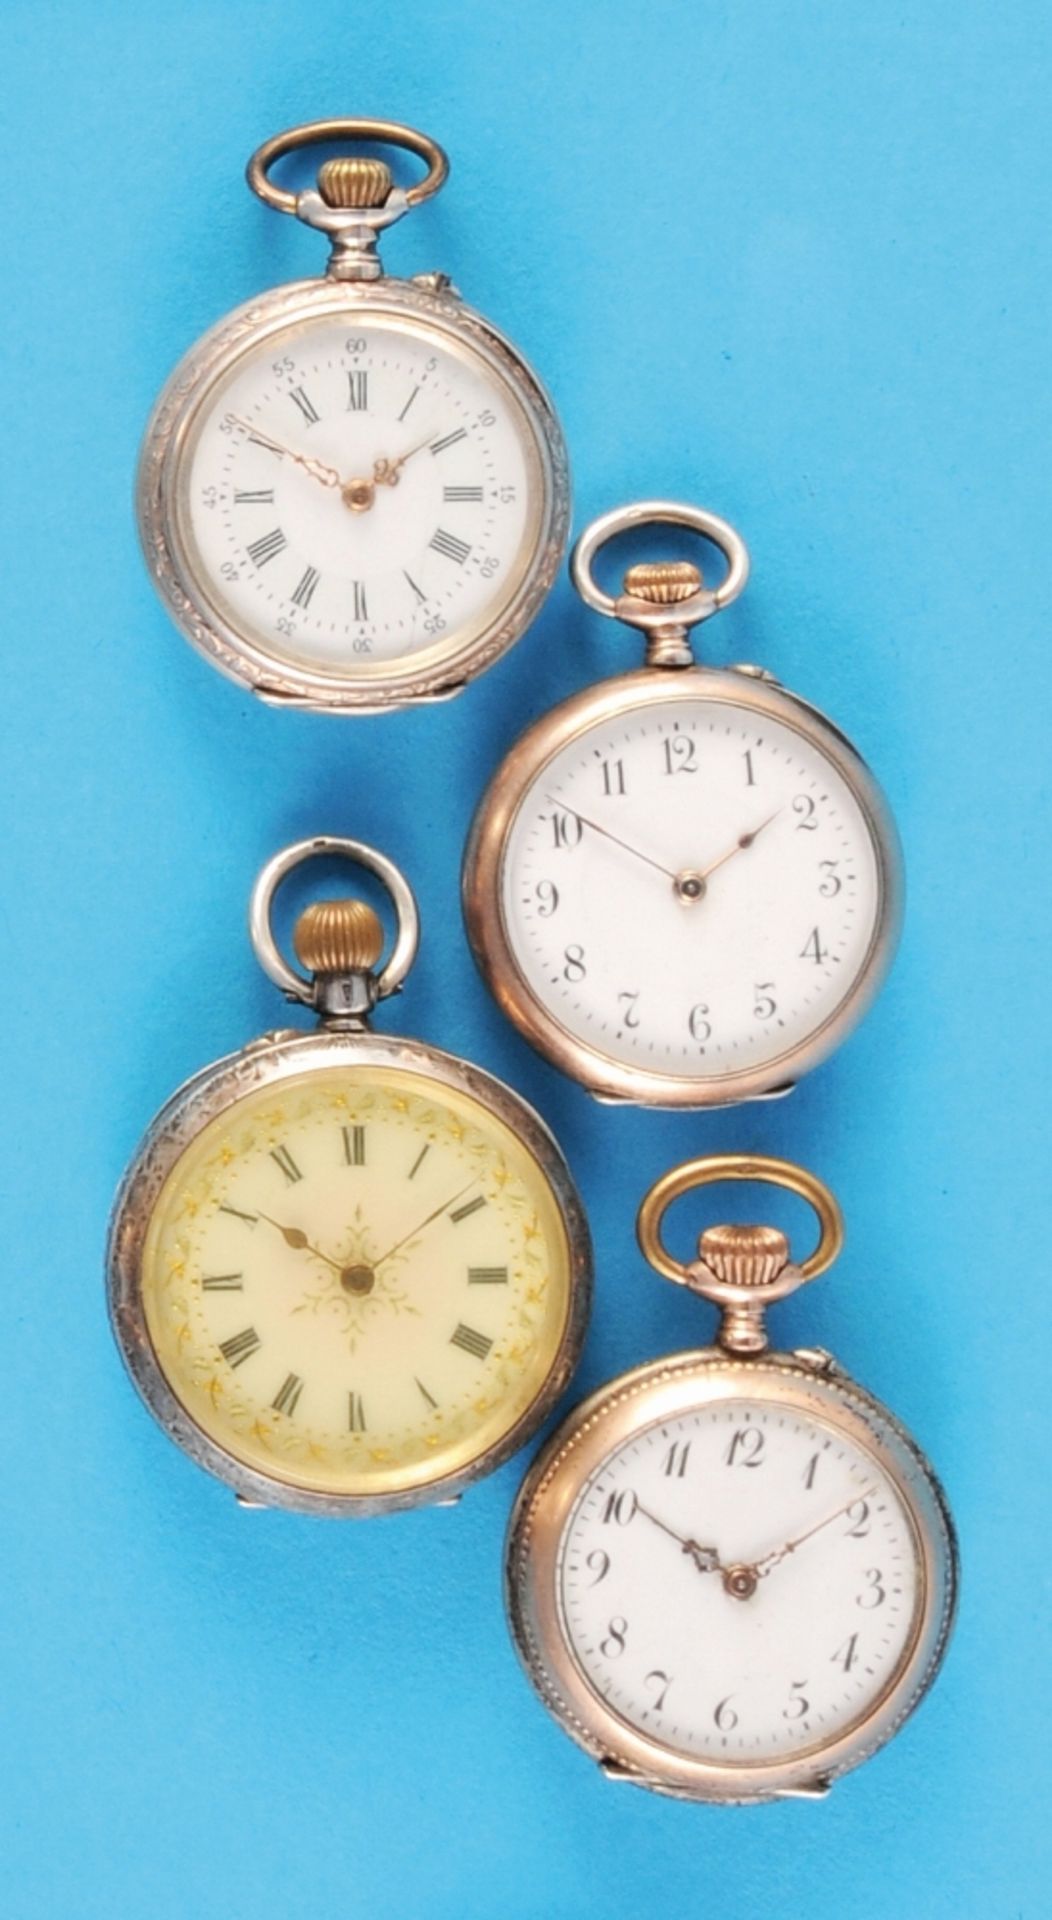 Set of 4 silver ladies' pocket watches, 1 with floral engraved case, 3 with guilloché case,